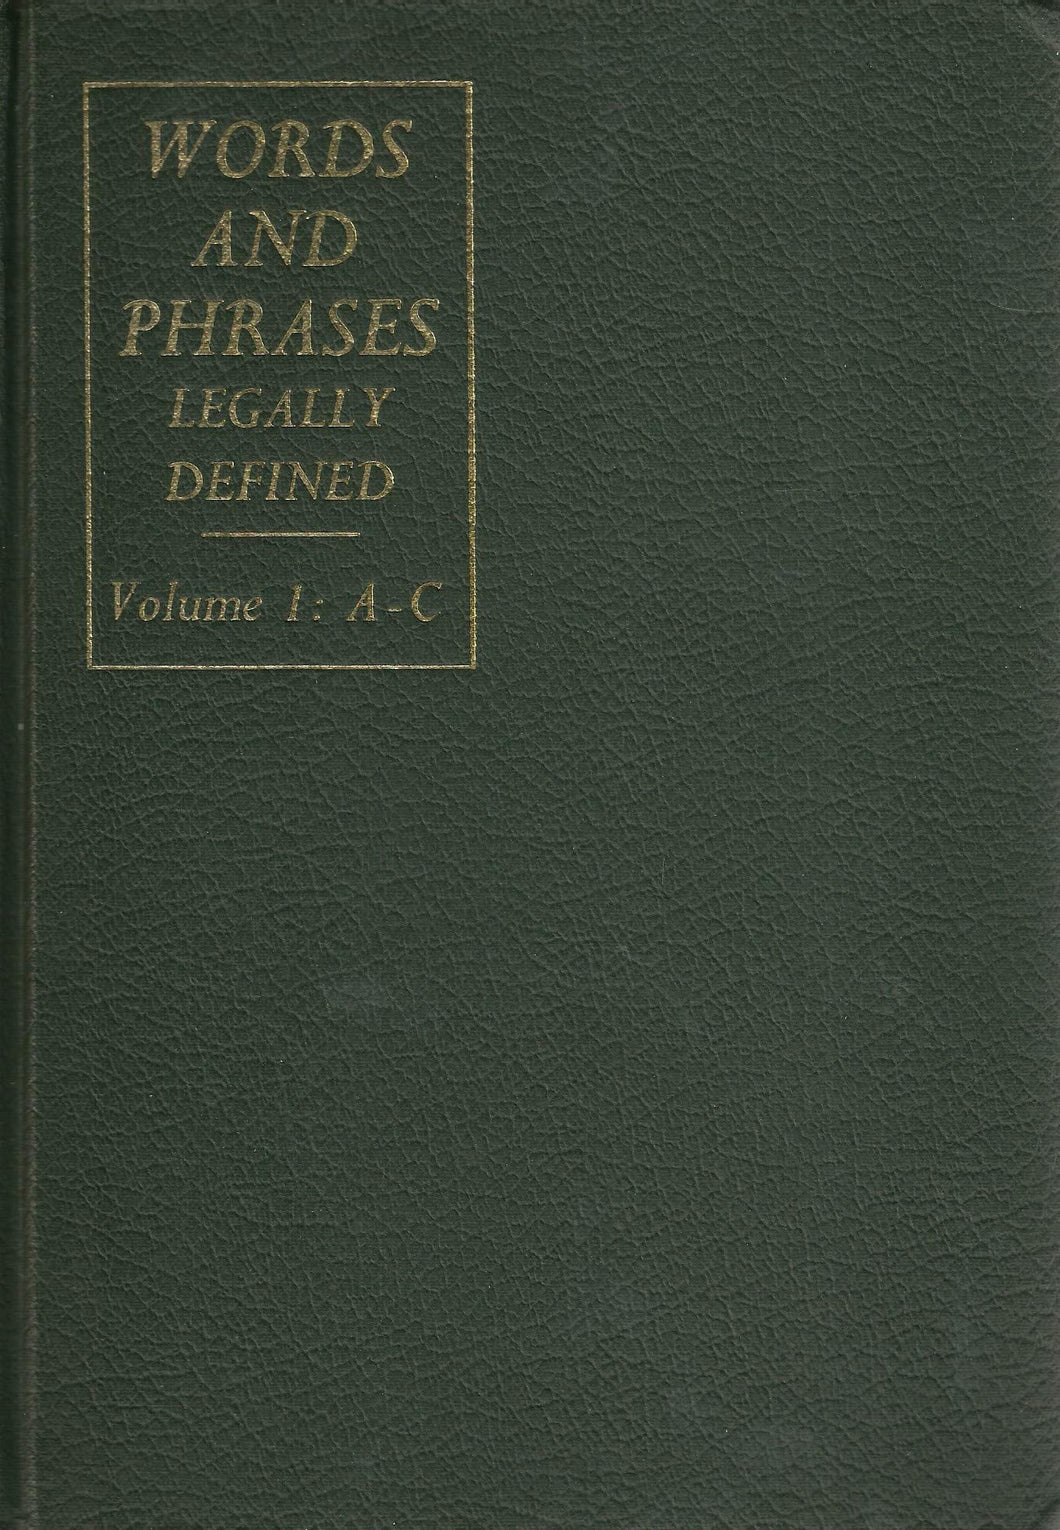 Words and Phrases Legally Defined - Second Edition, Volume 1: A-C